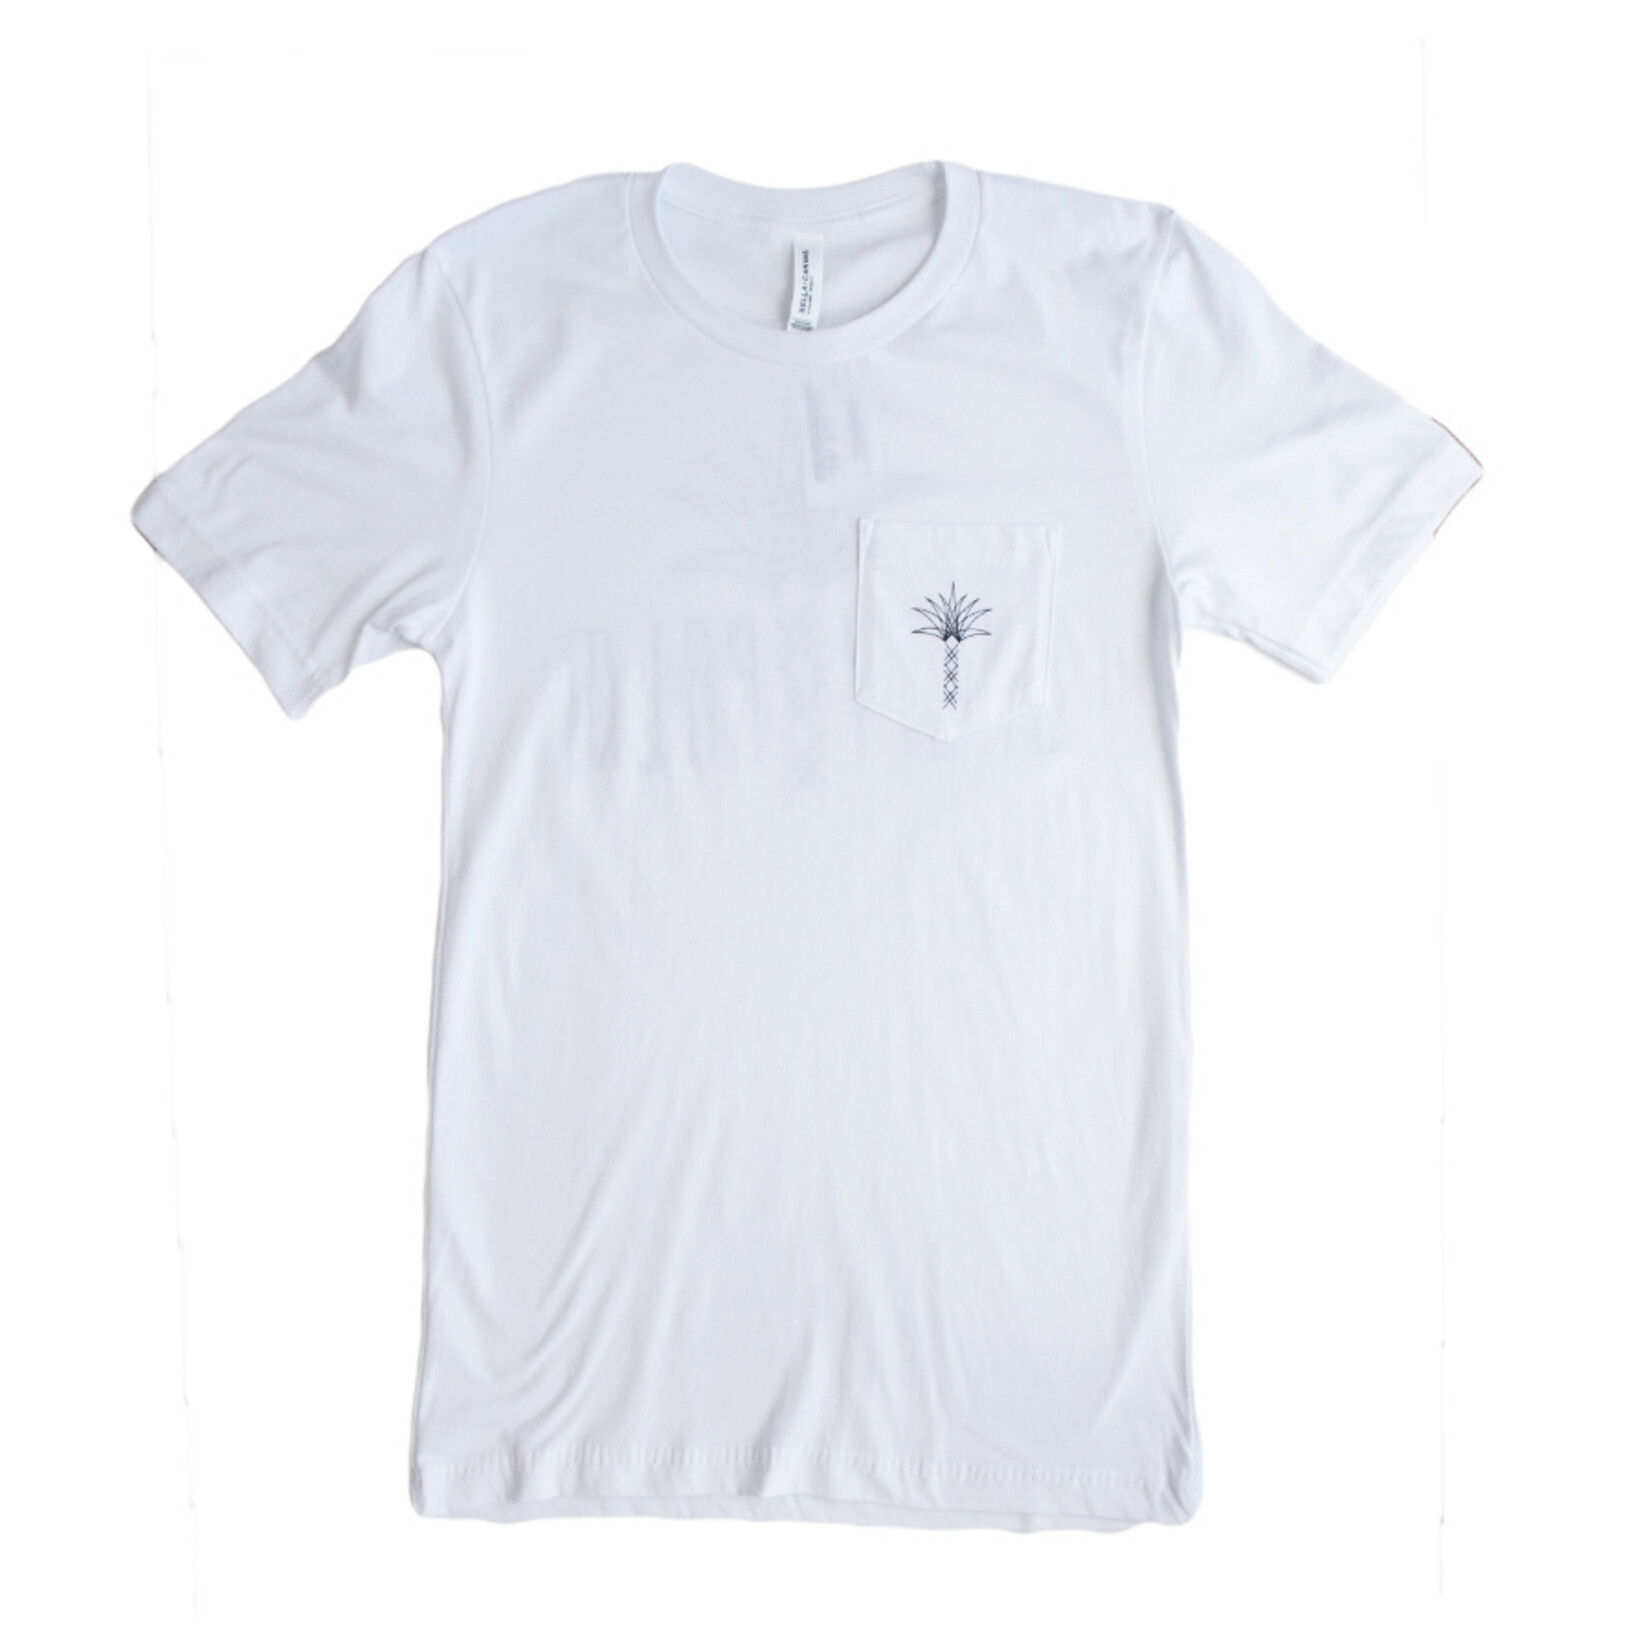 The Salty Palm The Salty Palm Pocket Tee